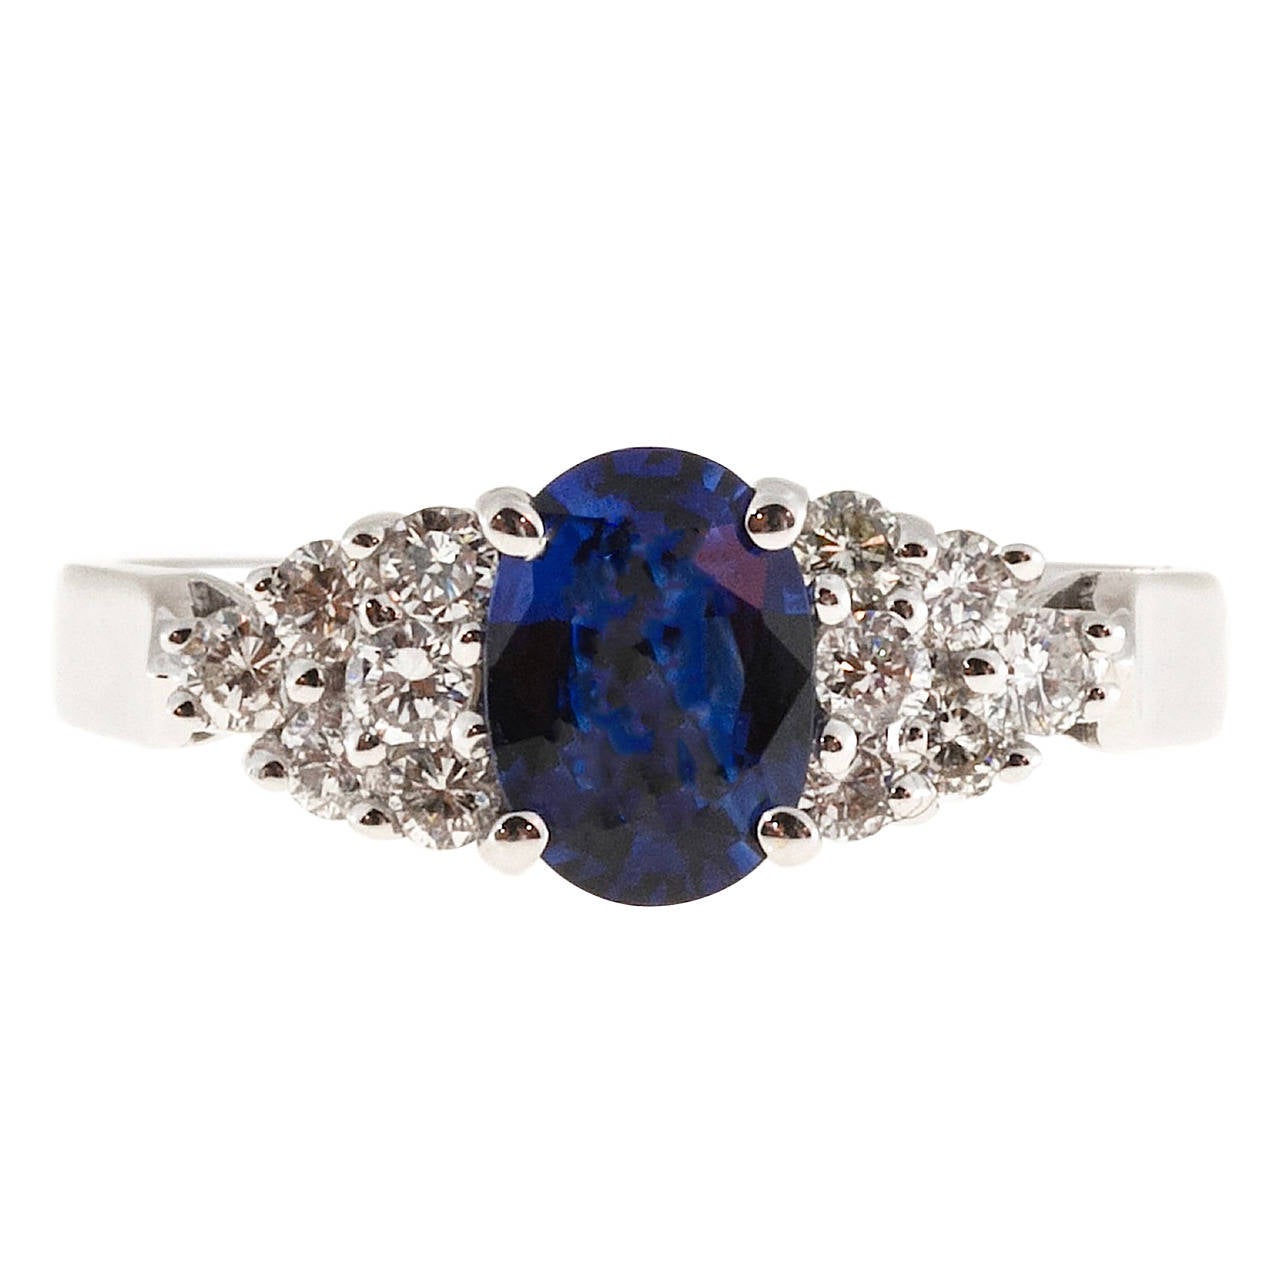 Blue oval Sapphire and round diamond engagement ring in a 18k white gold setting

1 oval bright blue Sapphire, approx. total weight 1.00cts, 7 x 5mm. Super bright blue, some color zoning
12 full cut diamonds, approx. total weight .36cts, F, SI1
Size